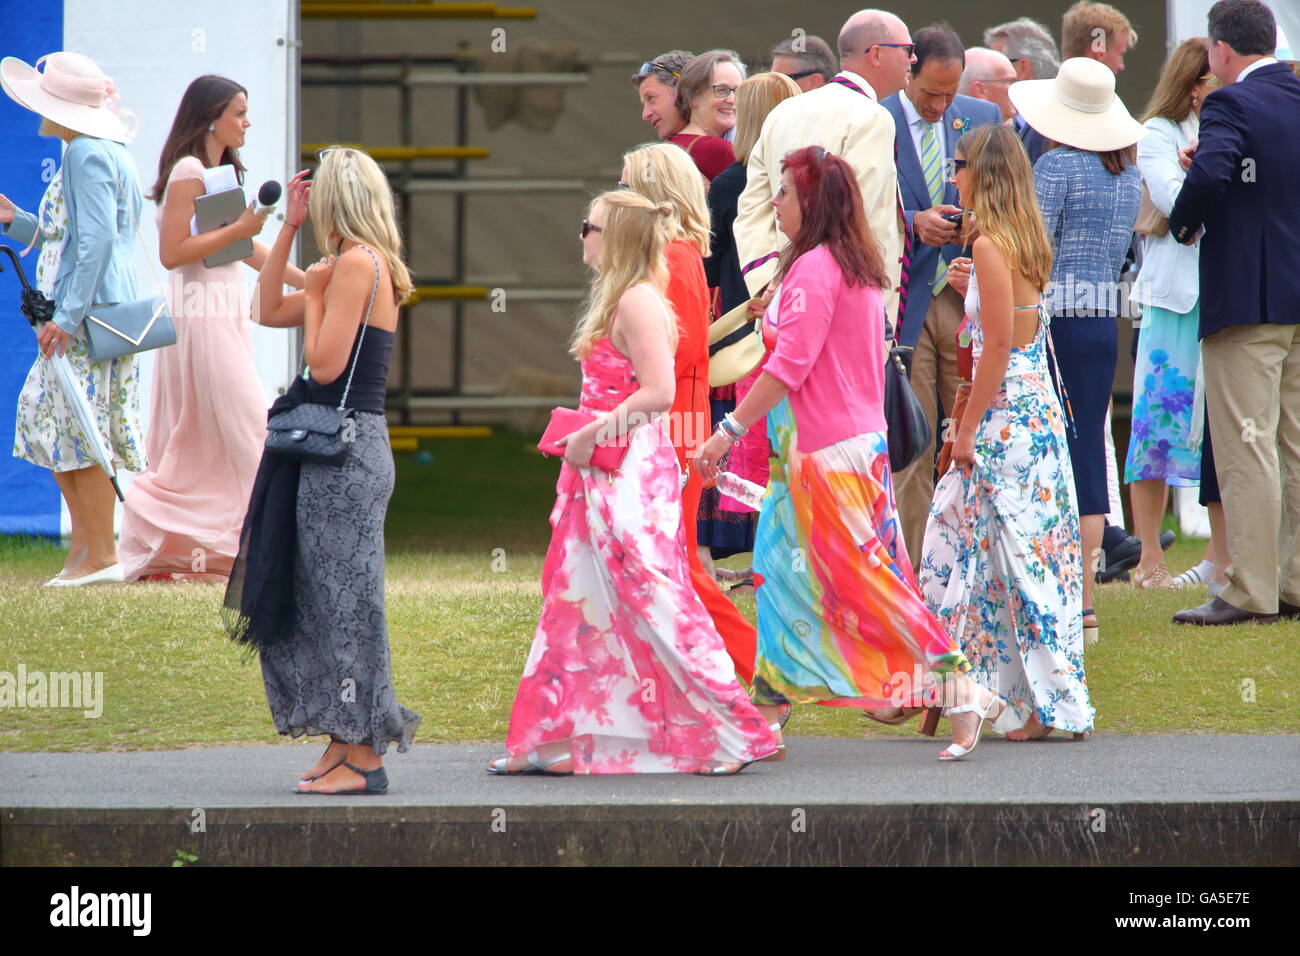 Rowers from all over the world came to the annual Henley Royal Regatta 2016. Ladies dressed for the occasion. Stock Photo